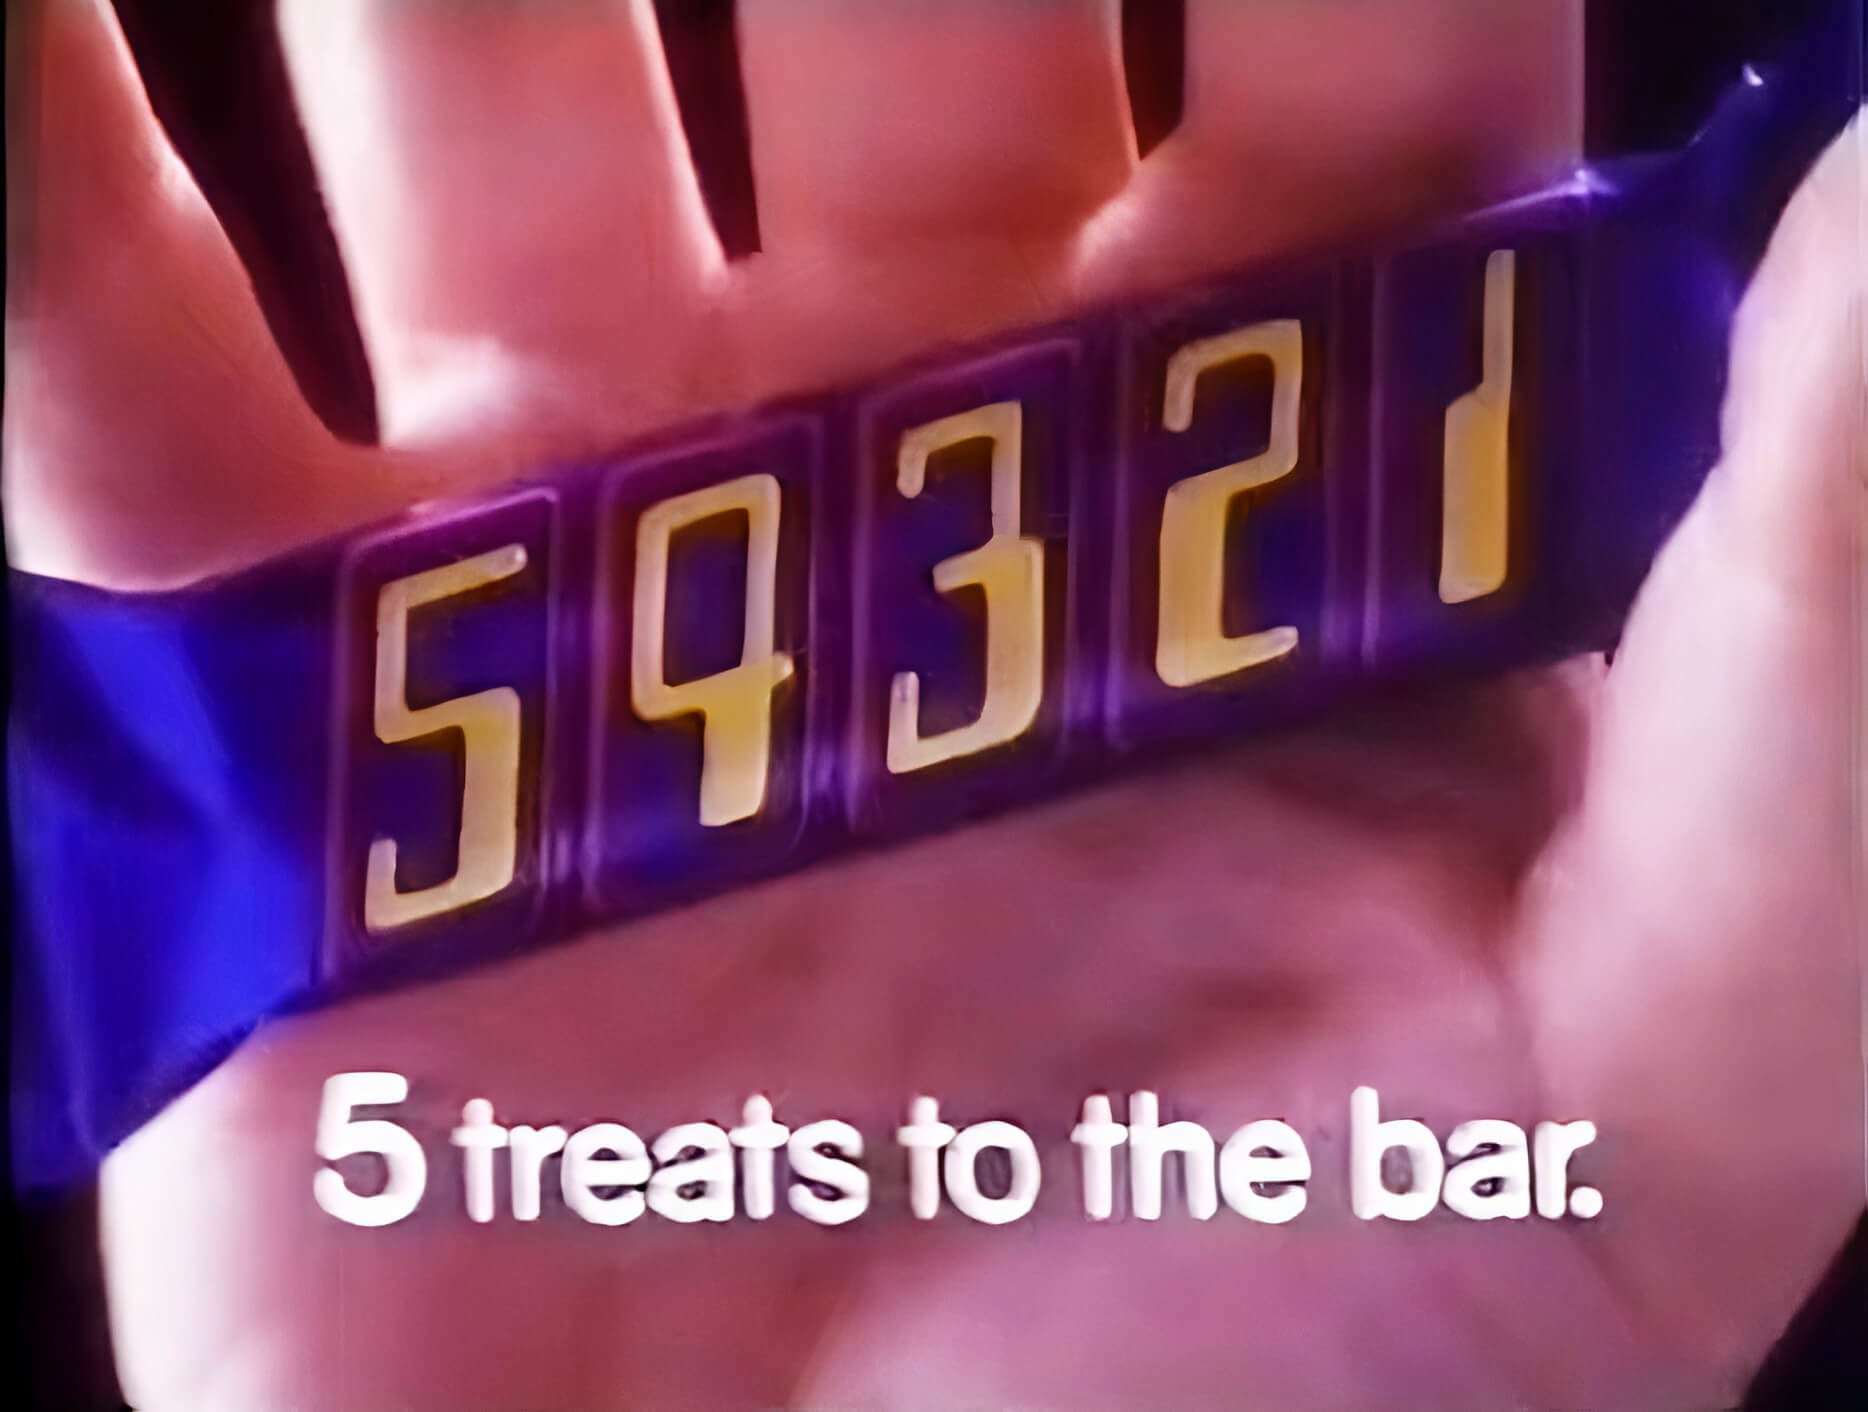 Original 54321 chocolate bar in a person's hand (1982) with tagline 5 treats to the bar.